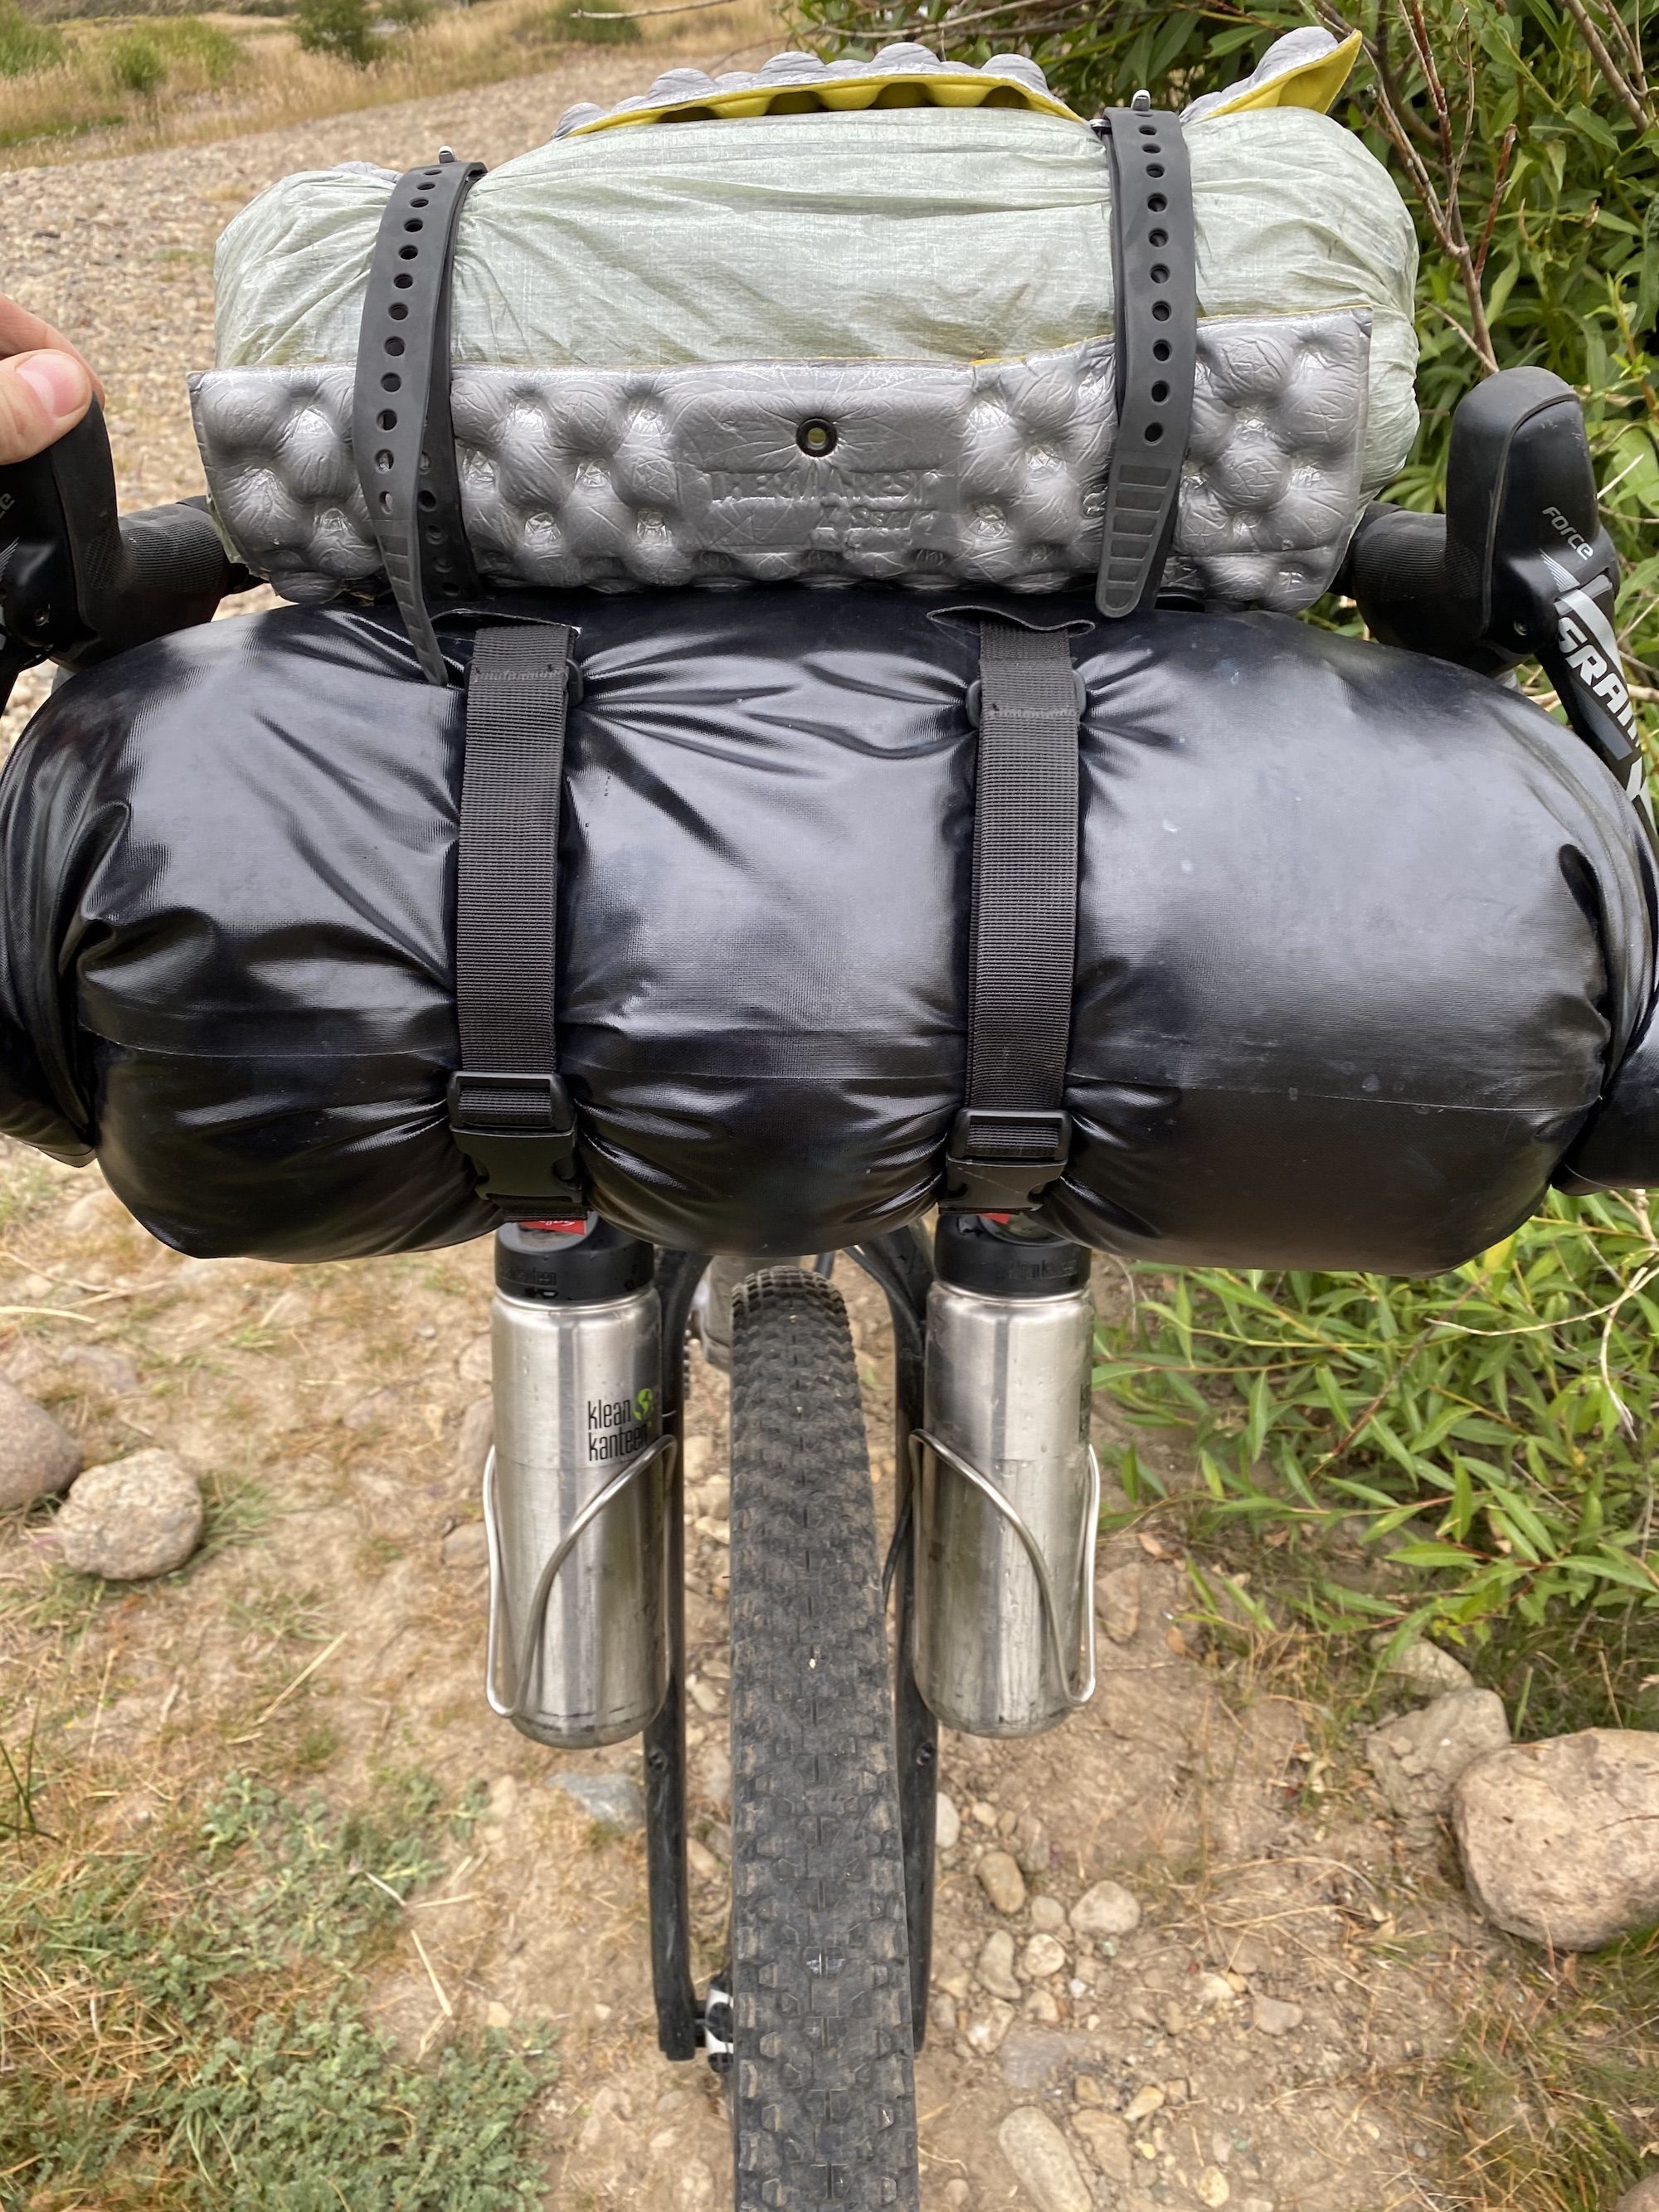 Bikepacking bag setup: a foam sit pad around a tent that is strapped to the handlebars of a bike